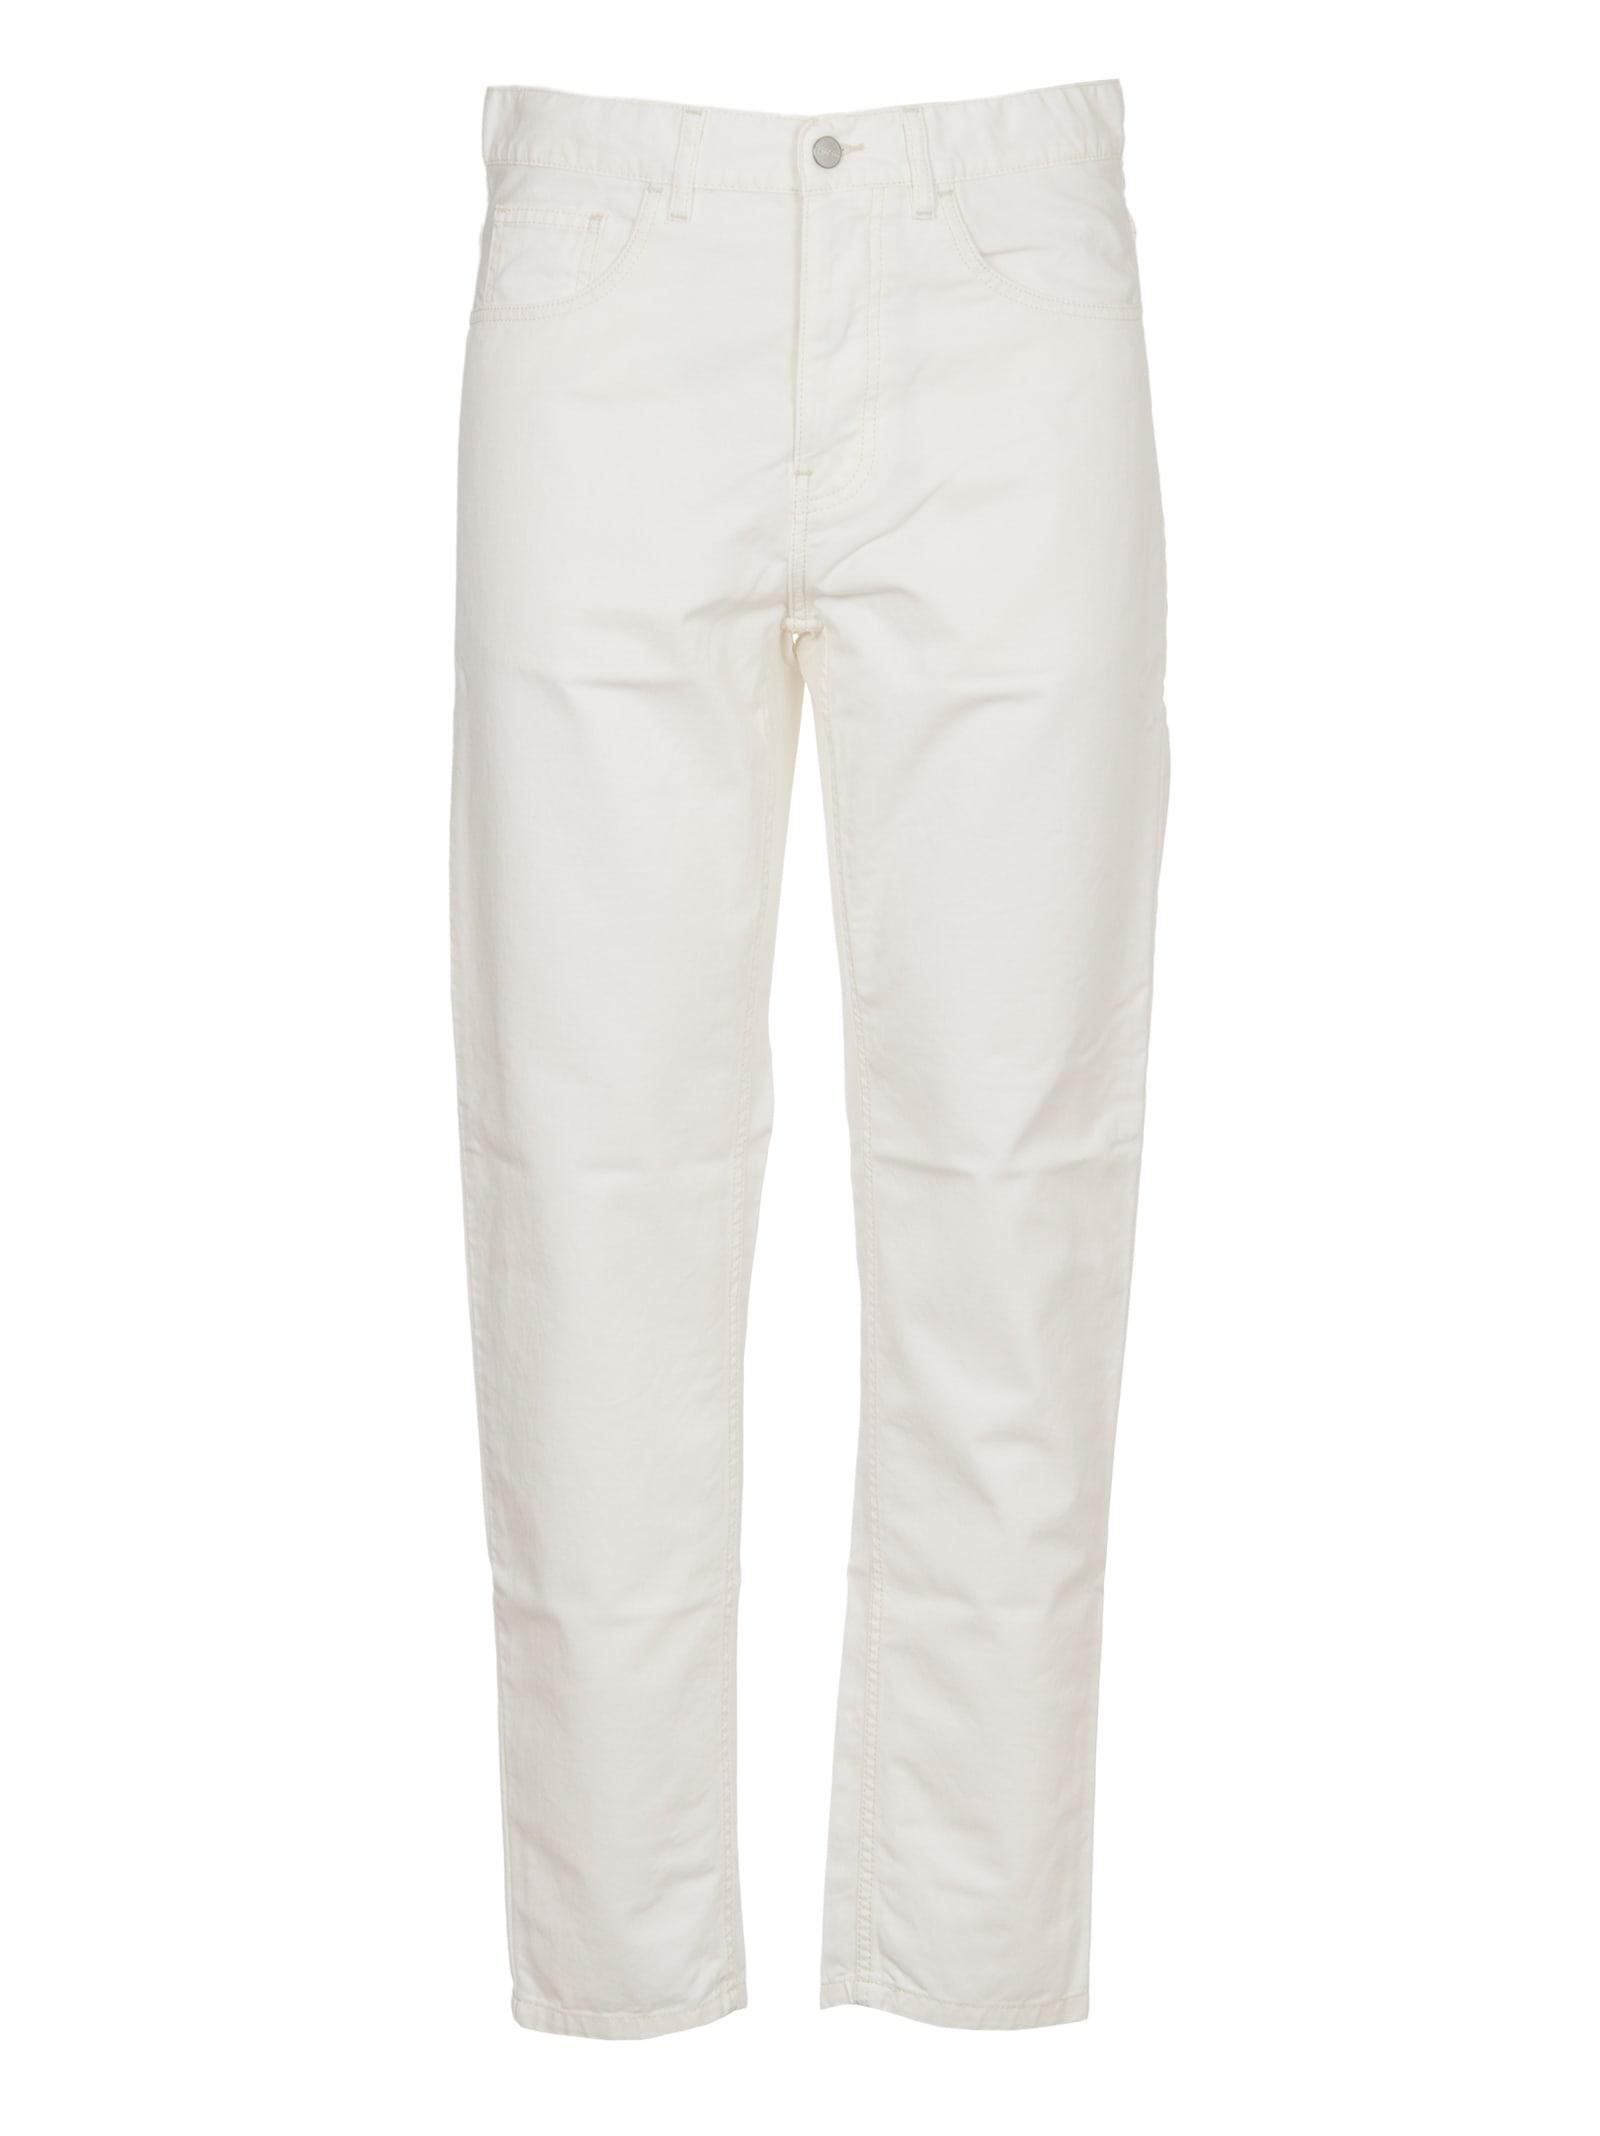 Carhartt Cotton Newel Trousers in White for Men - Save 18% | Lyst